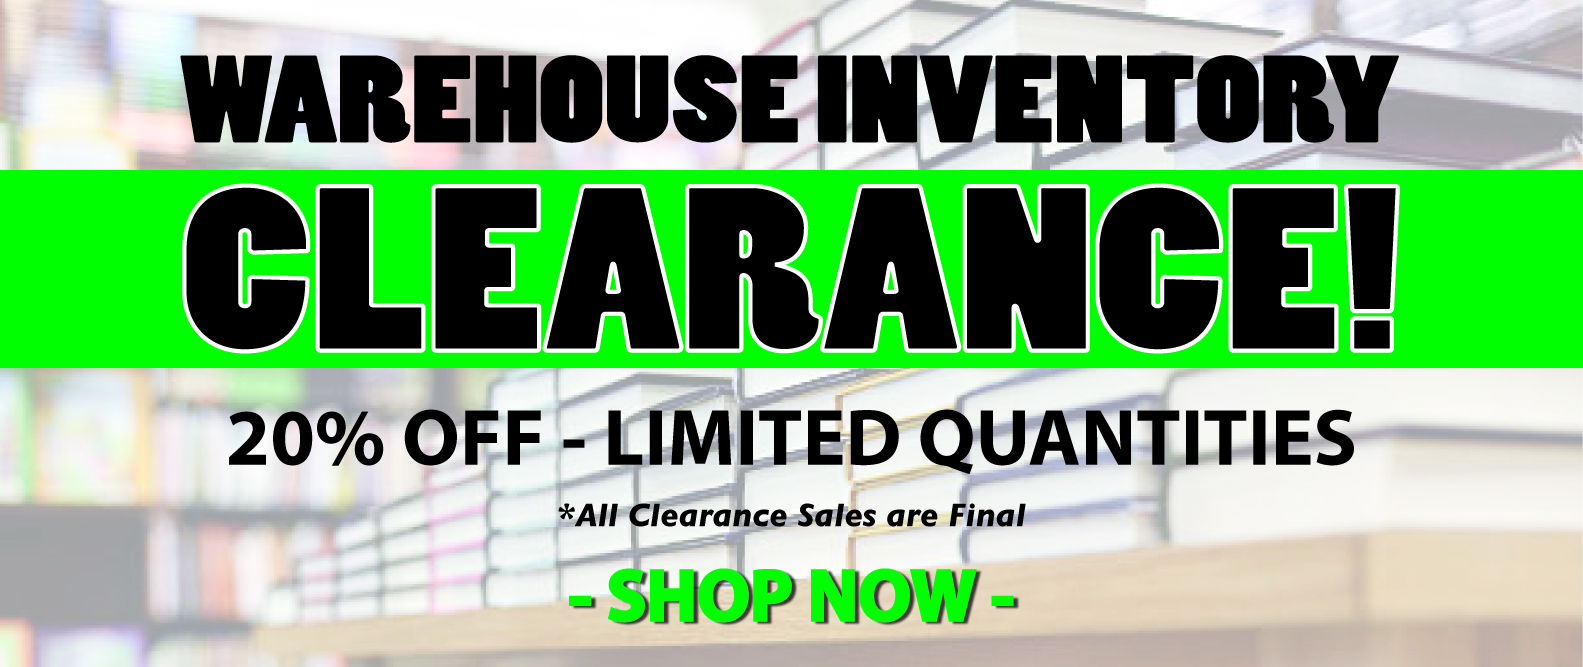 Inventory Clearance Sale Banner